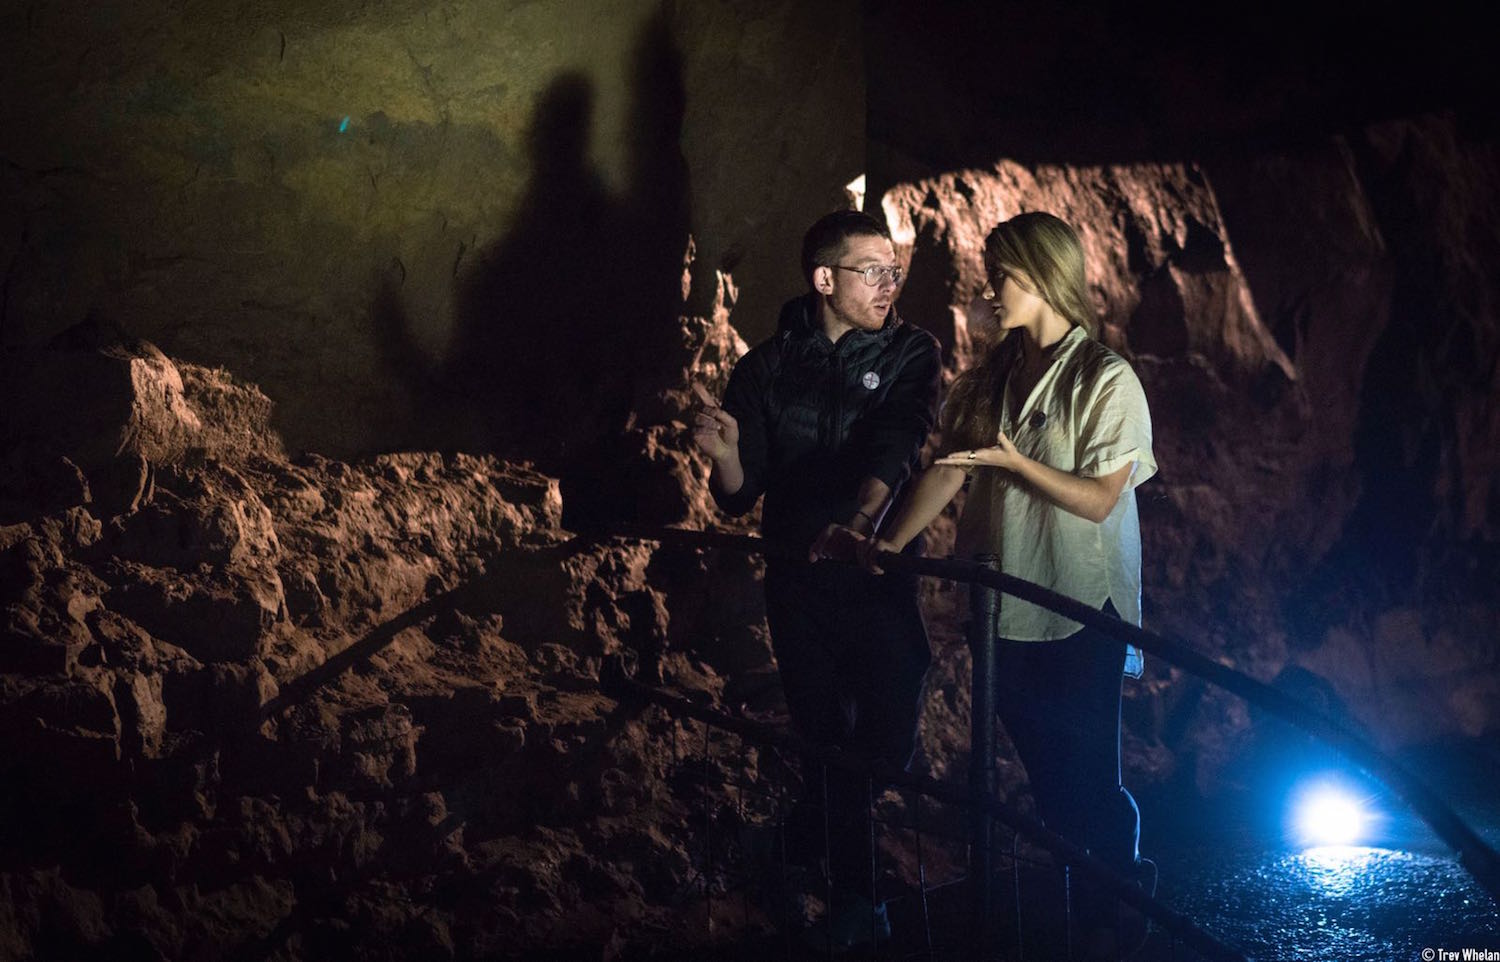 Entirely hollow aside from the dark, AlanJames Burns and Sue Rainsford discussing the work in Aillwee Caves, 2017. Photo by Trevor Whelan.